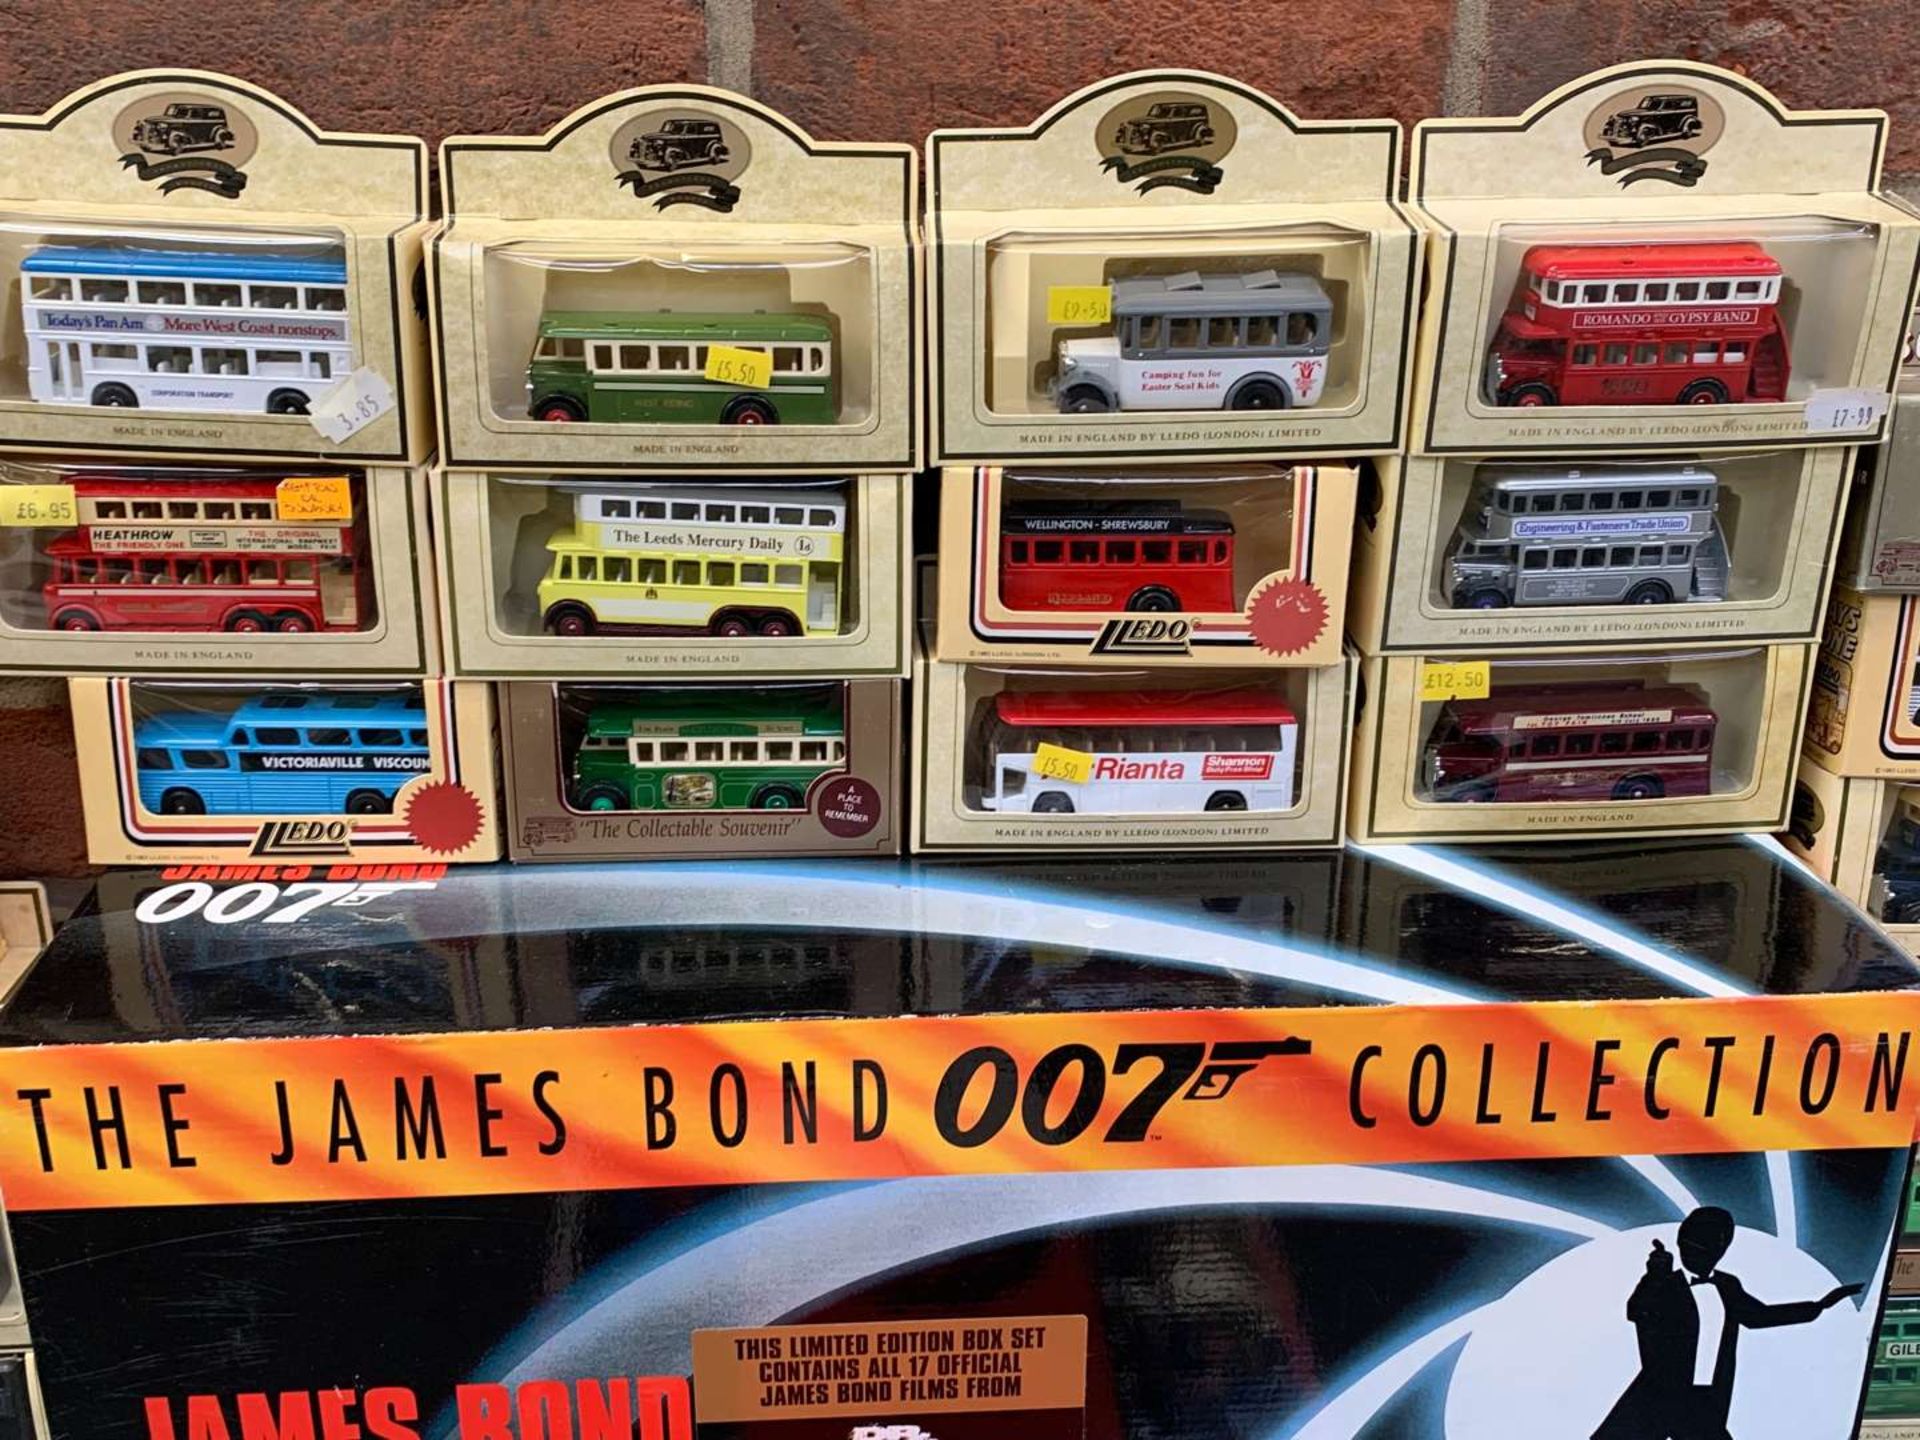 Quantity Die Cast Days Gone Buses and James Bond Boxed Set, Calendars Etc - Image 4 of 6